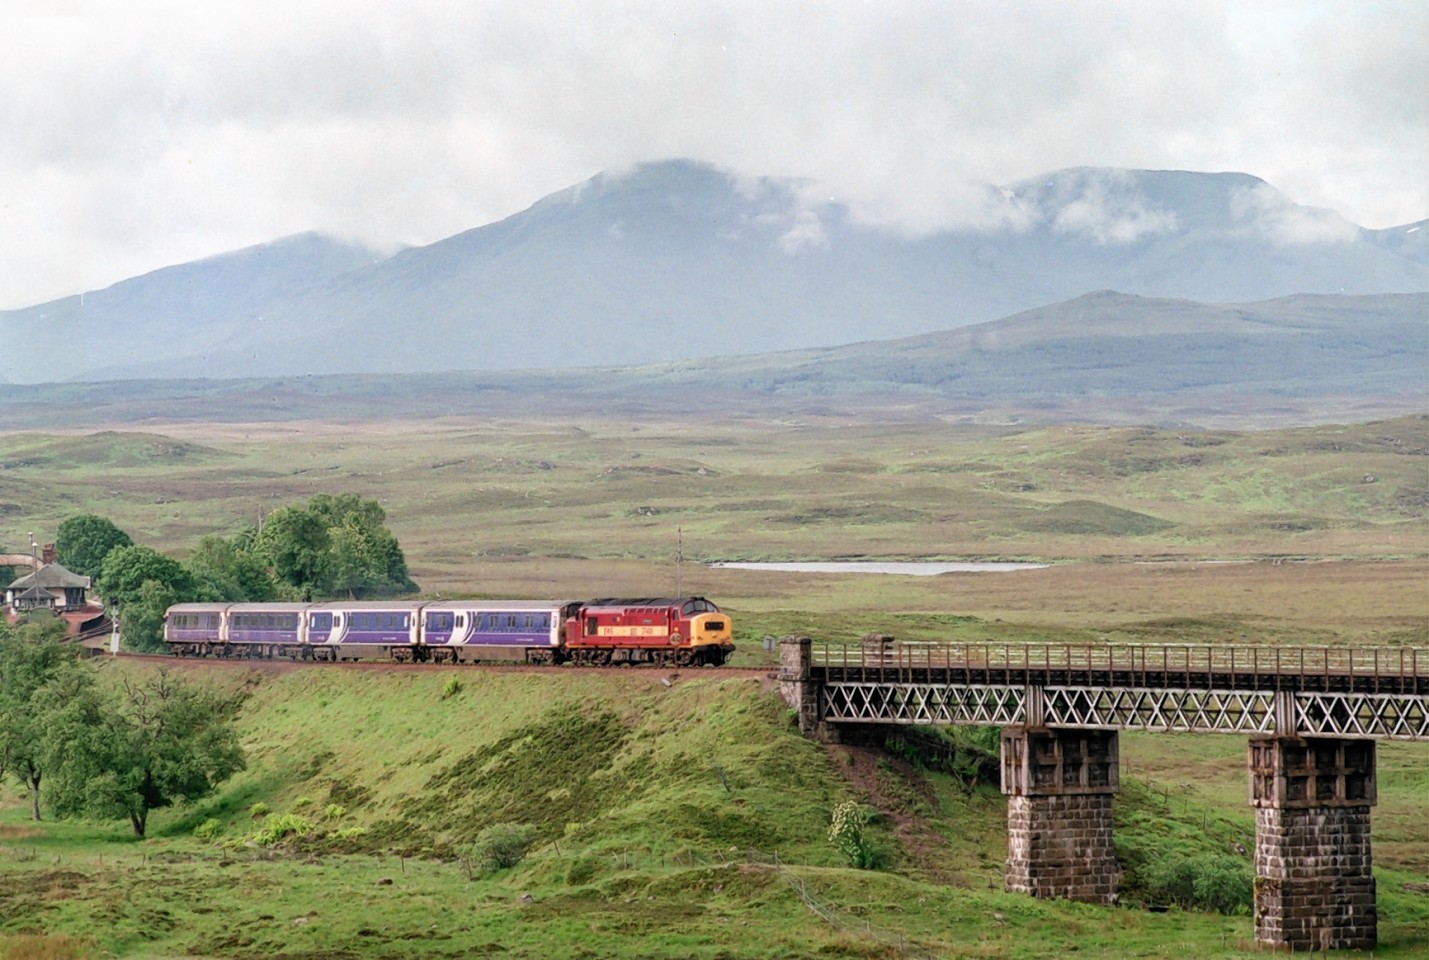 The scenic railway line between Rannoch and Fort William